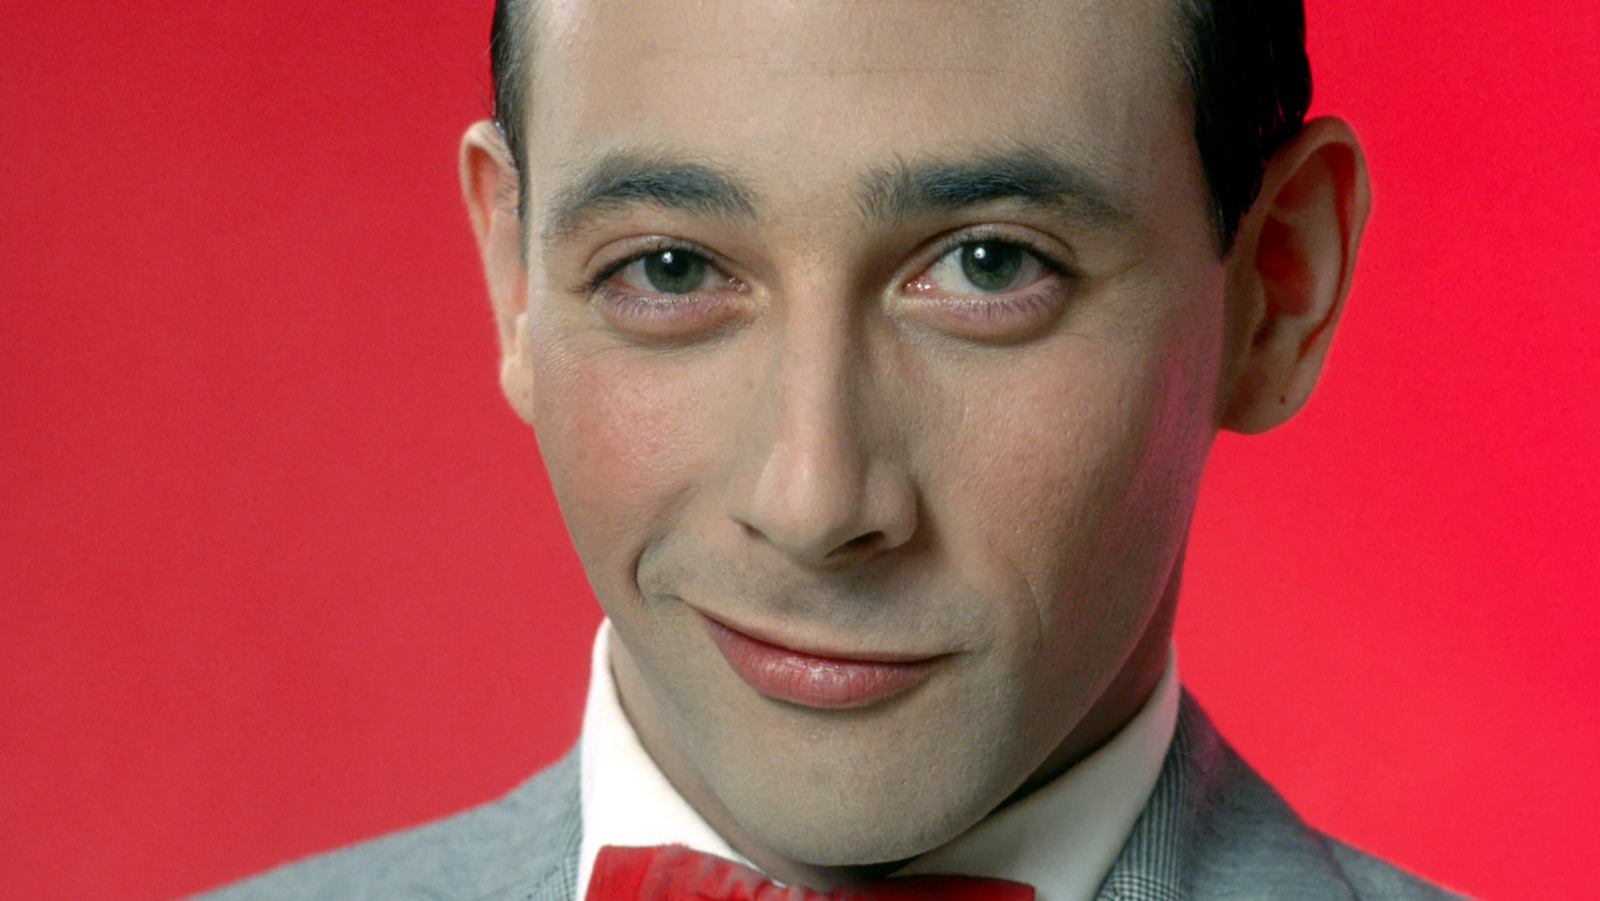 Paul Reubens How dare he got to an adult jerk off theater and jerk off in the presence of other adults who went to the adult jerk off theater specifically to jerk off in the presence of other adults who were also jerking off.Won't someone please think of 